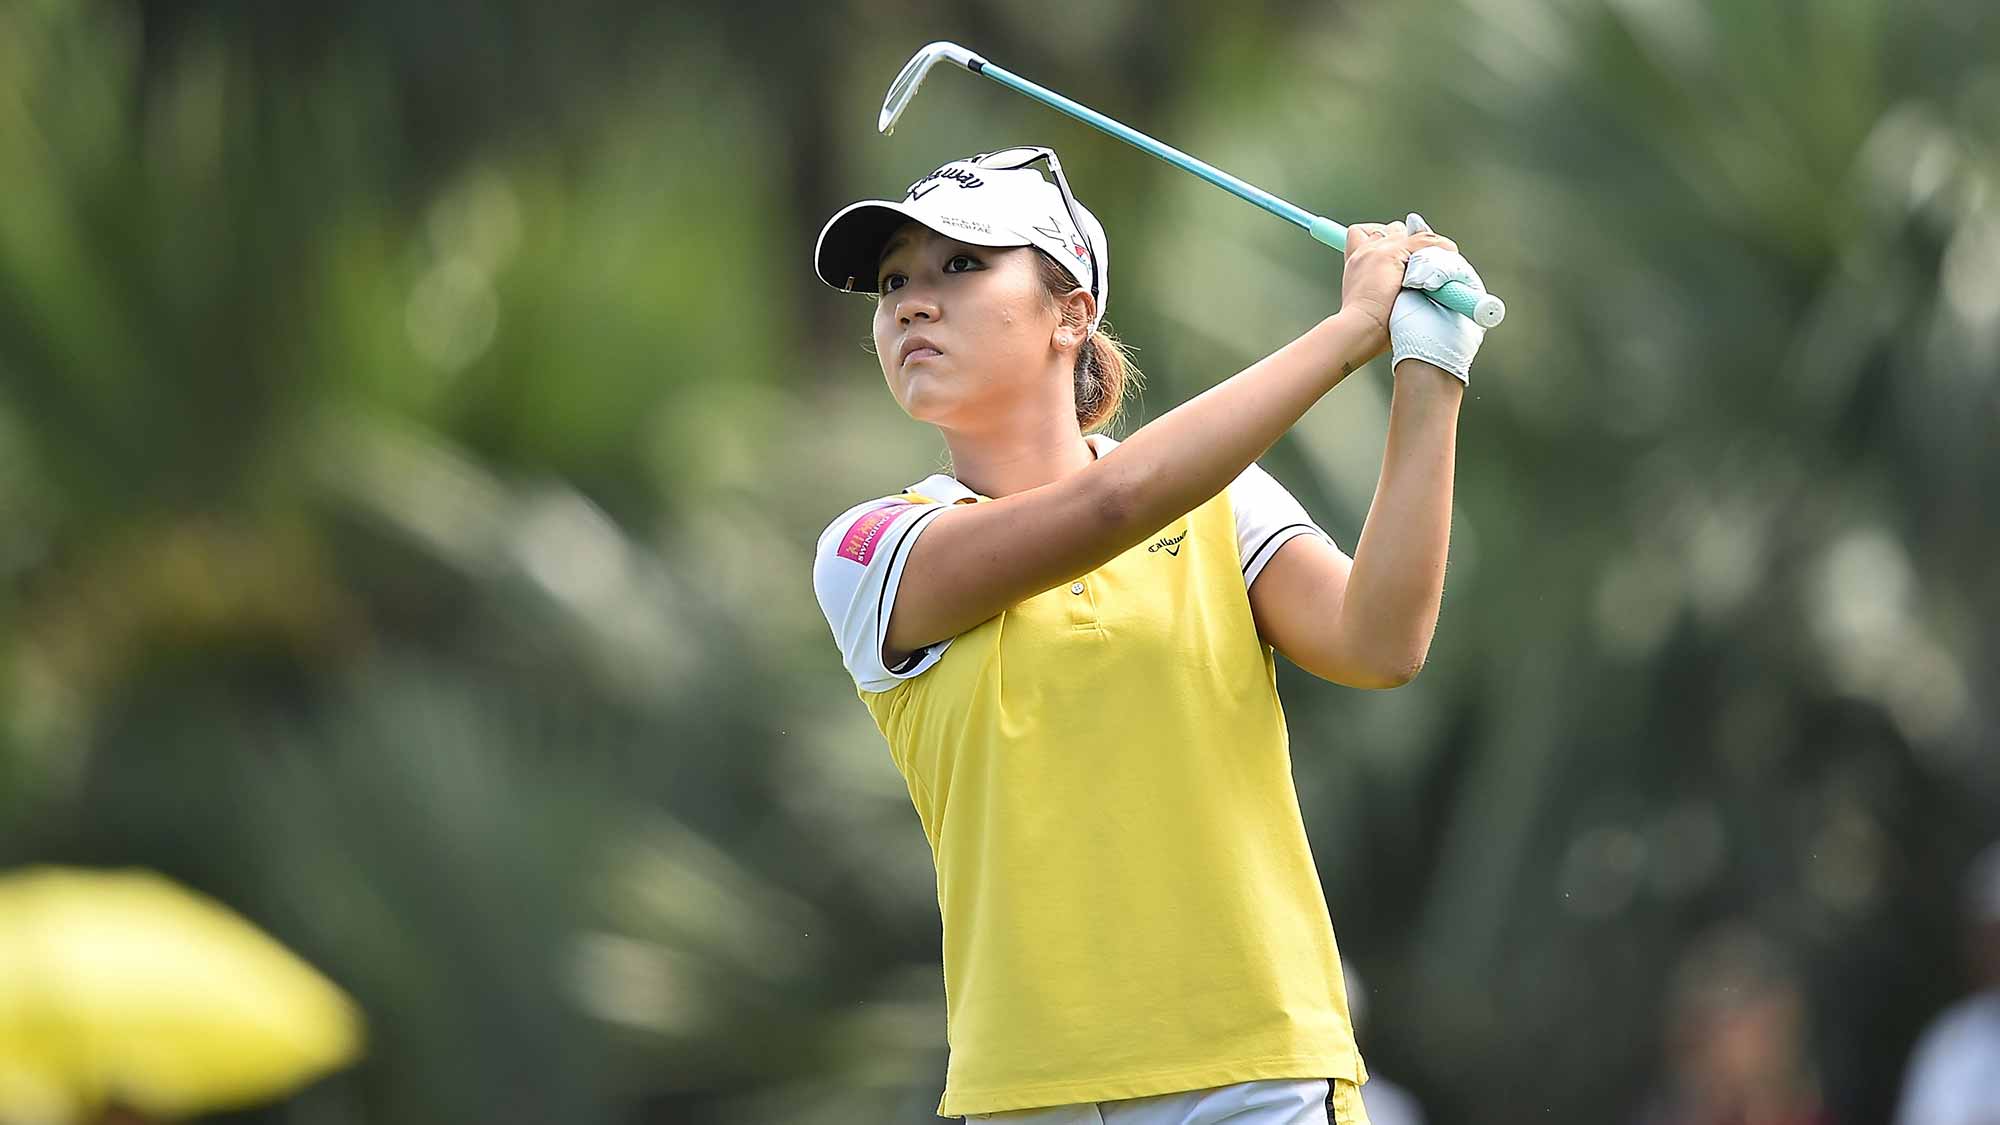 Lydia Ko of New Zealand plays a shot during the final round of 2015 Fubon LPGA Taiwan Championship on October 25, 2015 in Miramar Resort & Country Club